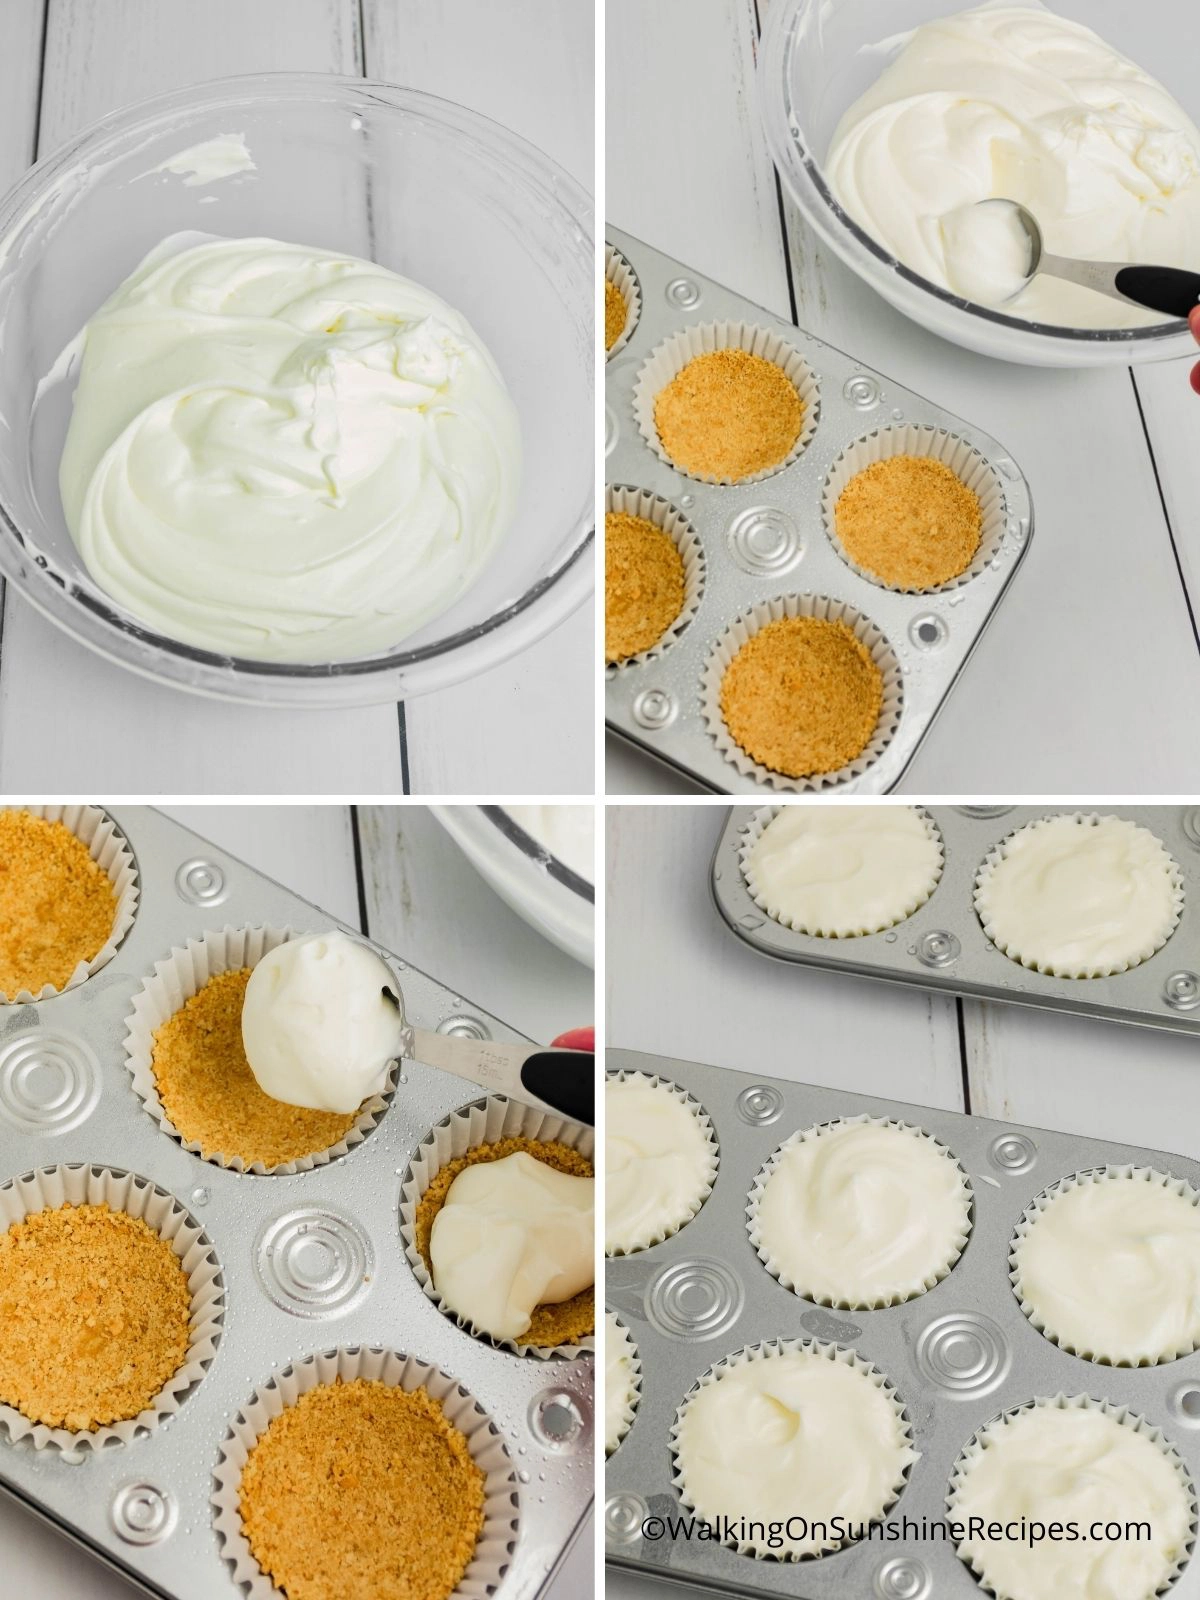 Fill muffin pans with cream cheese vanilla pudding mixture.